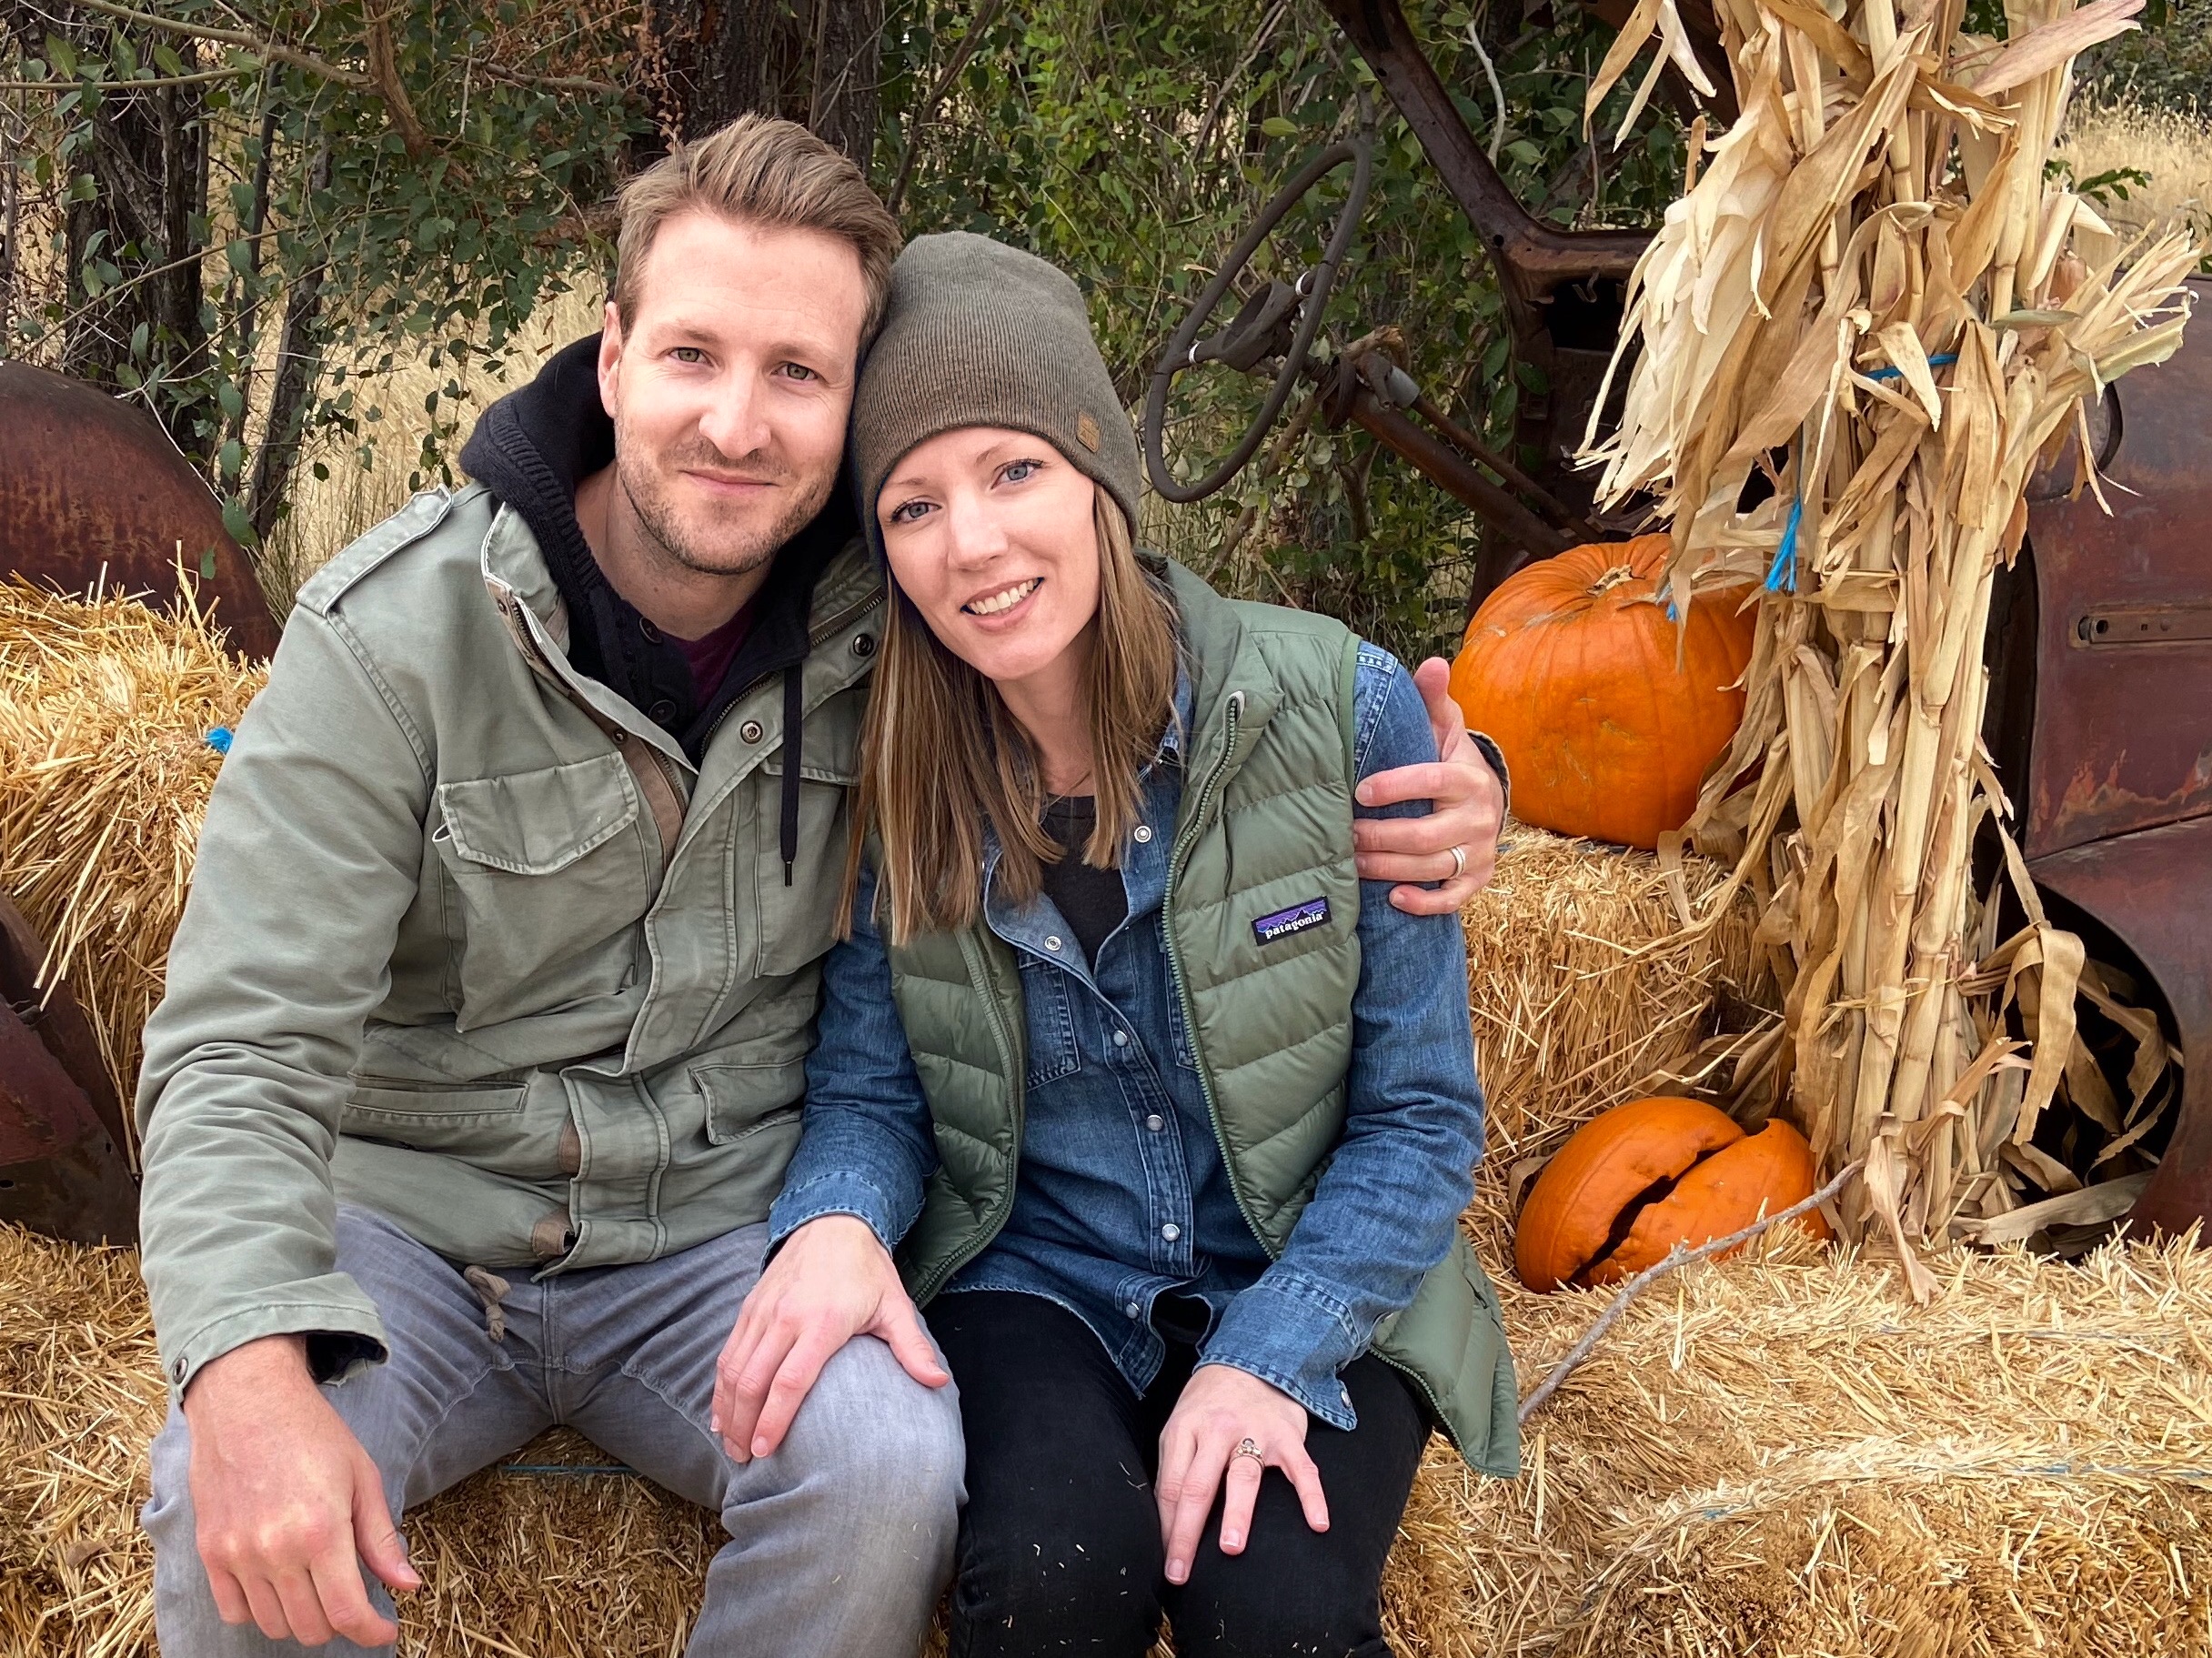 Katie and Jeff at the pumpkin patch.